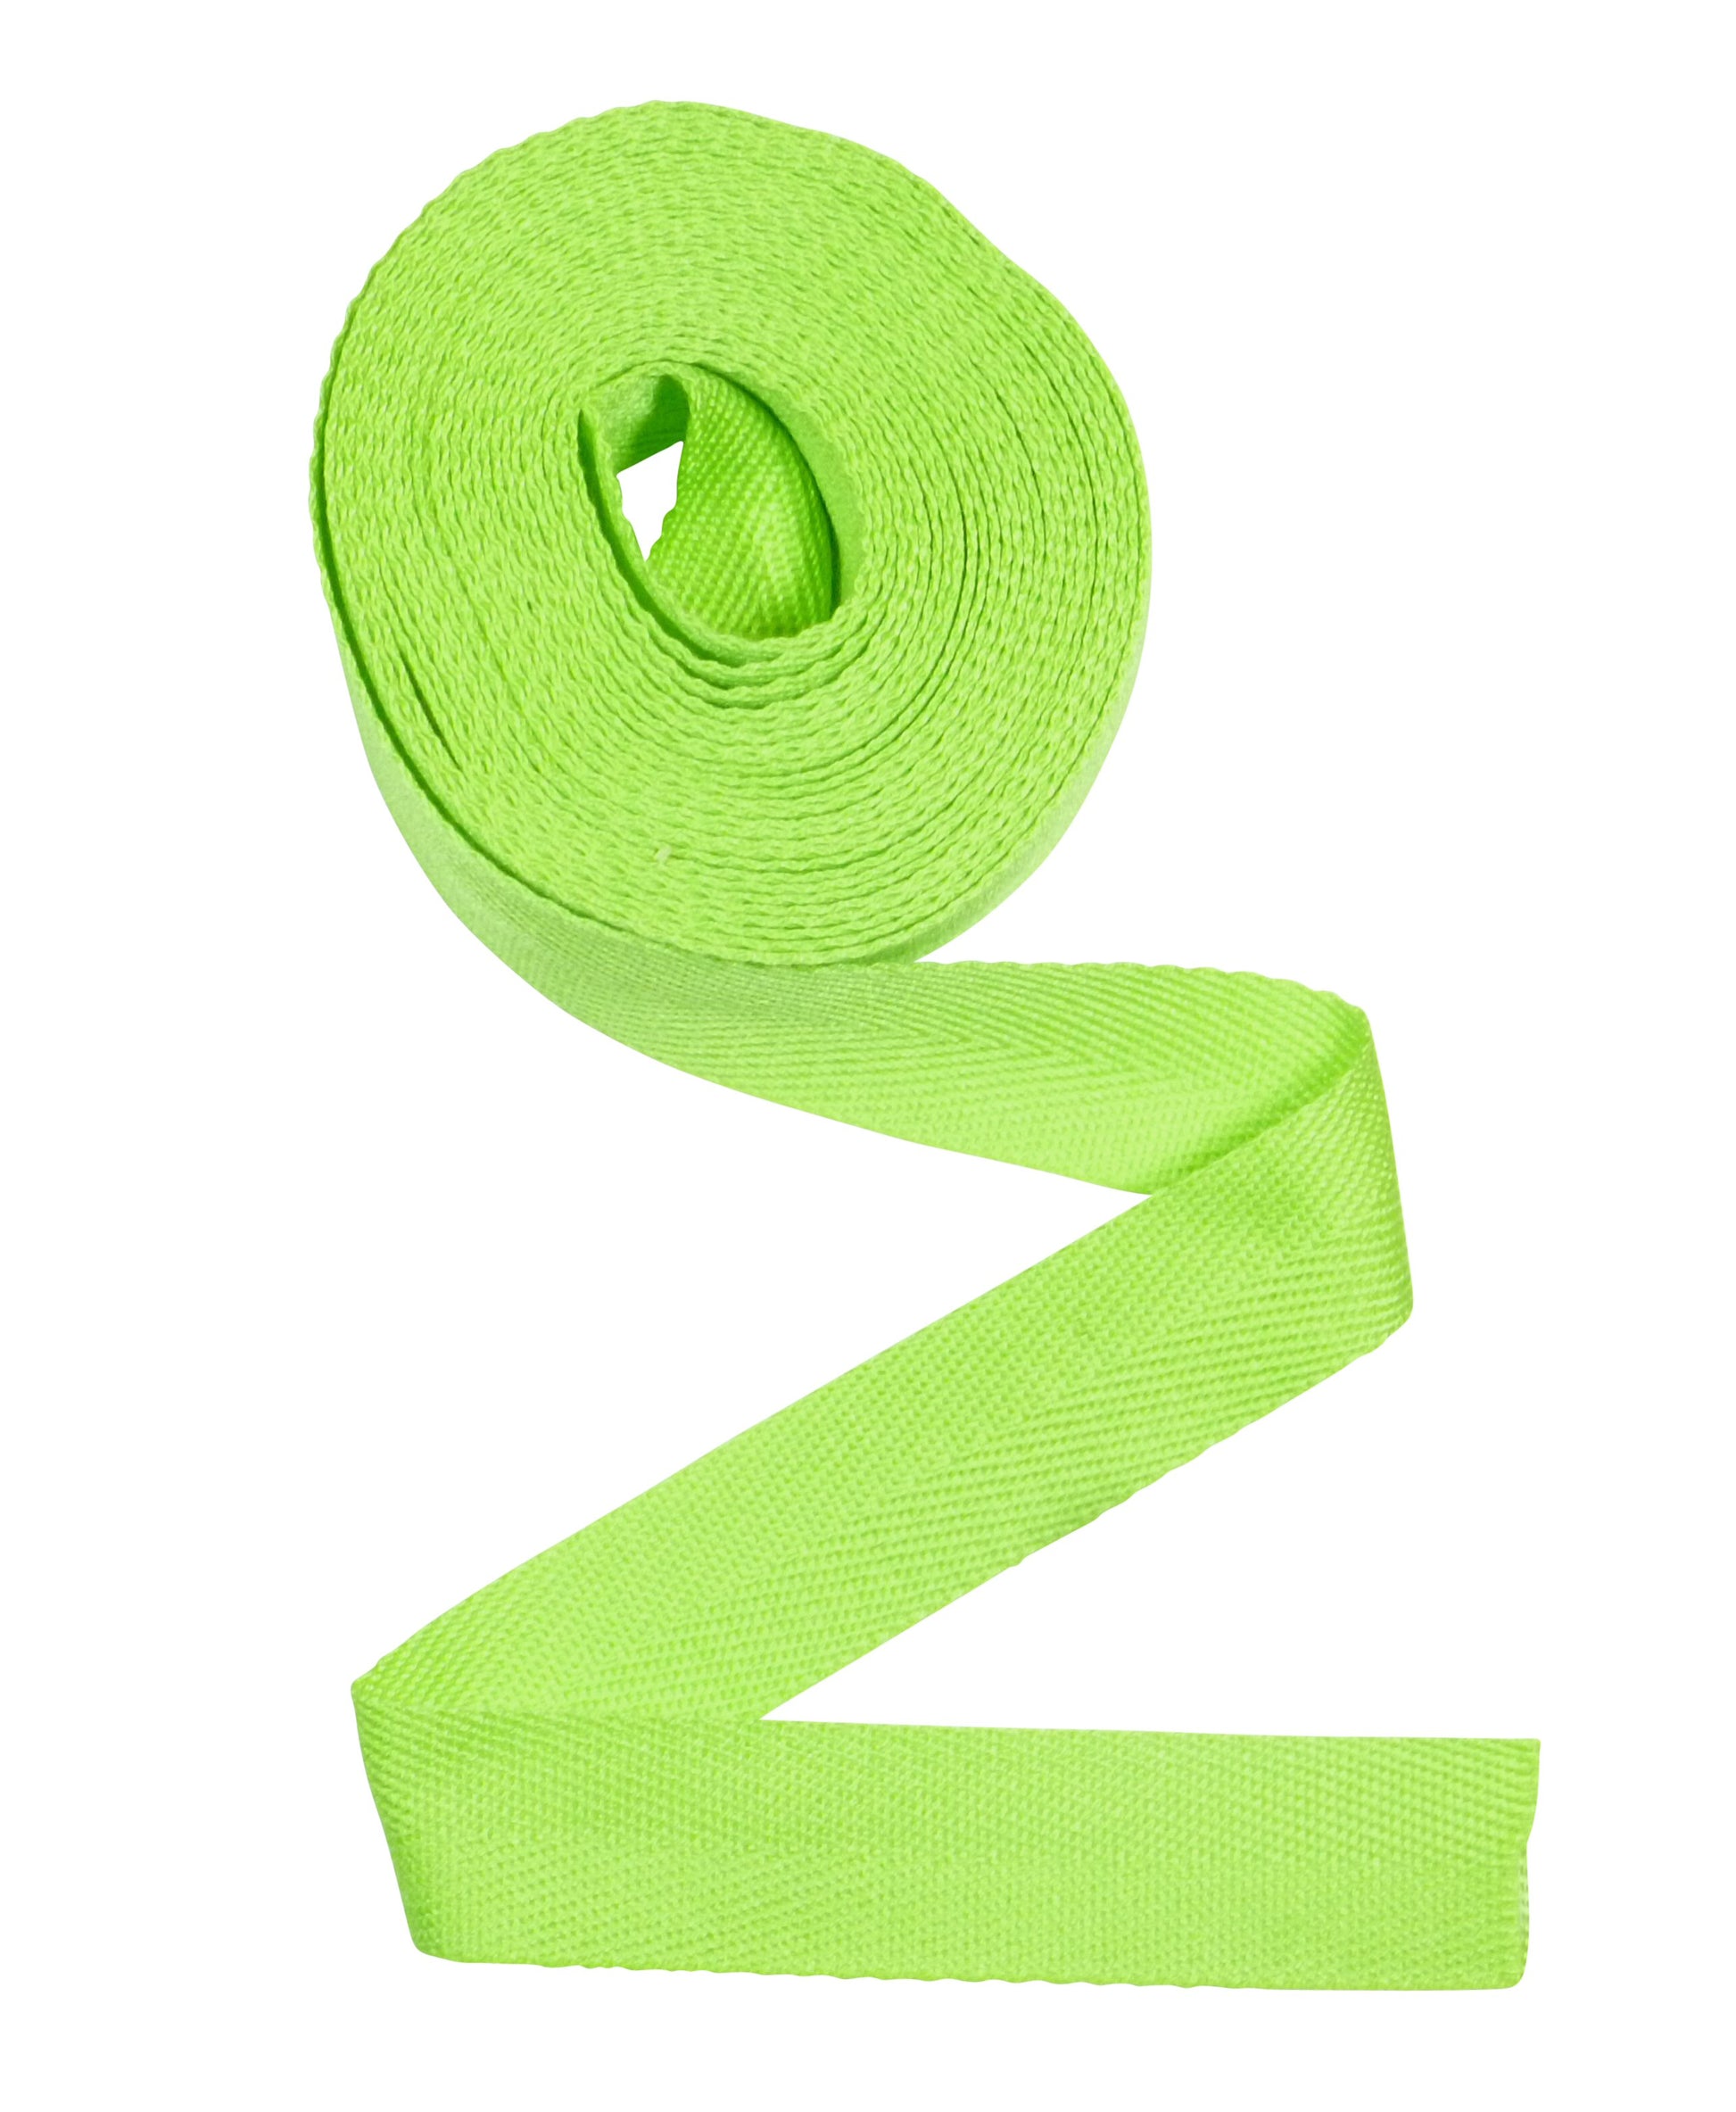 Benristraps 25mm Acrylic Twill Tape, 5 Metre Length in lime green